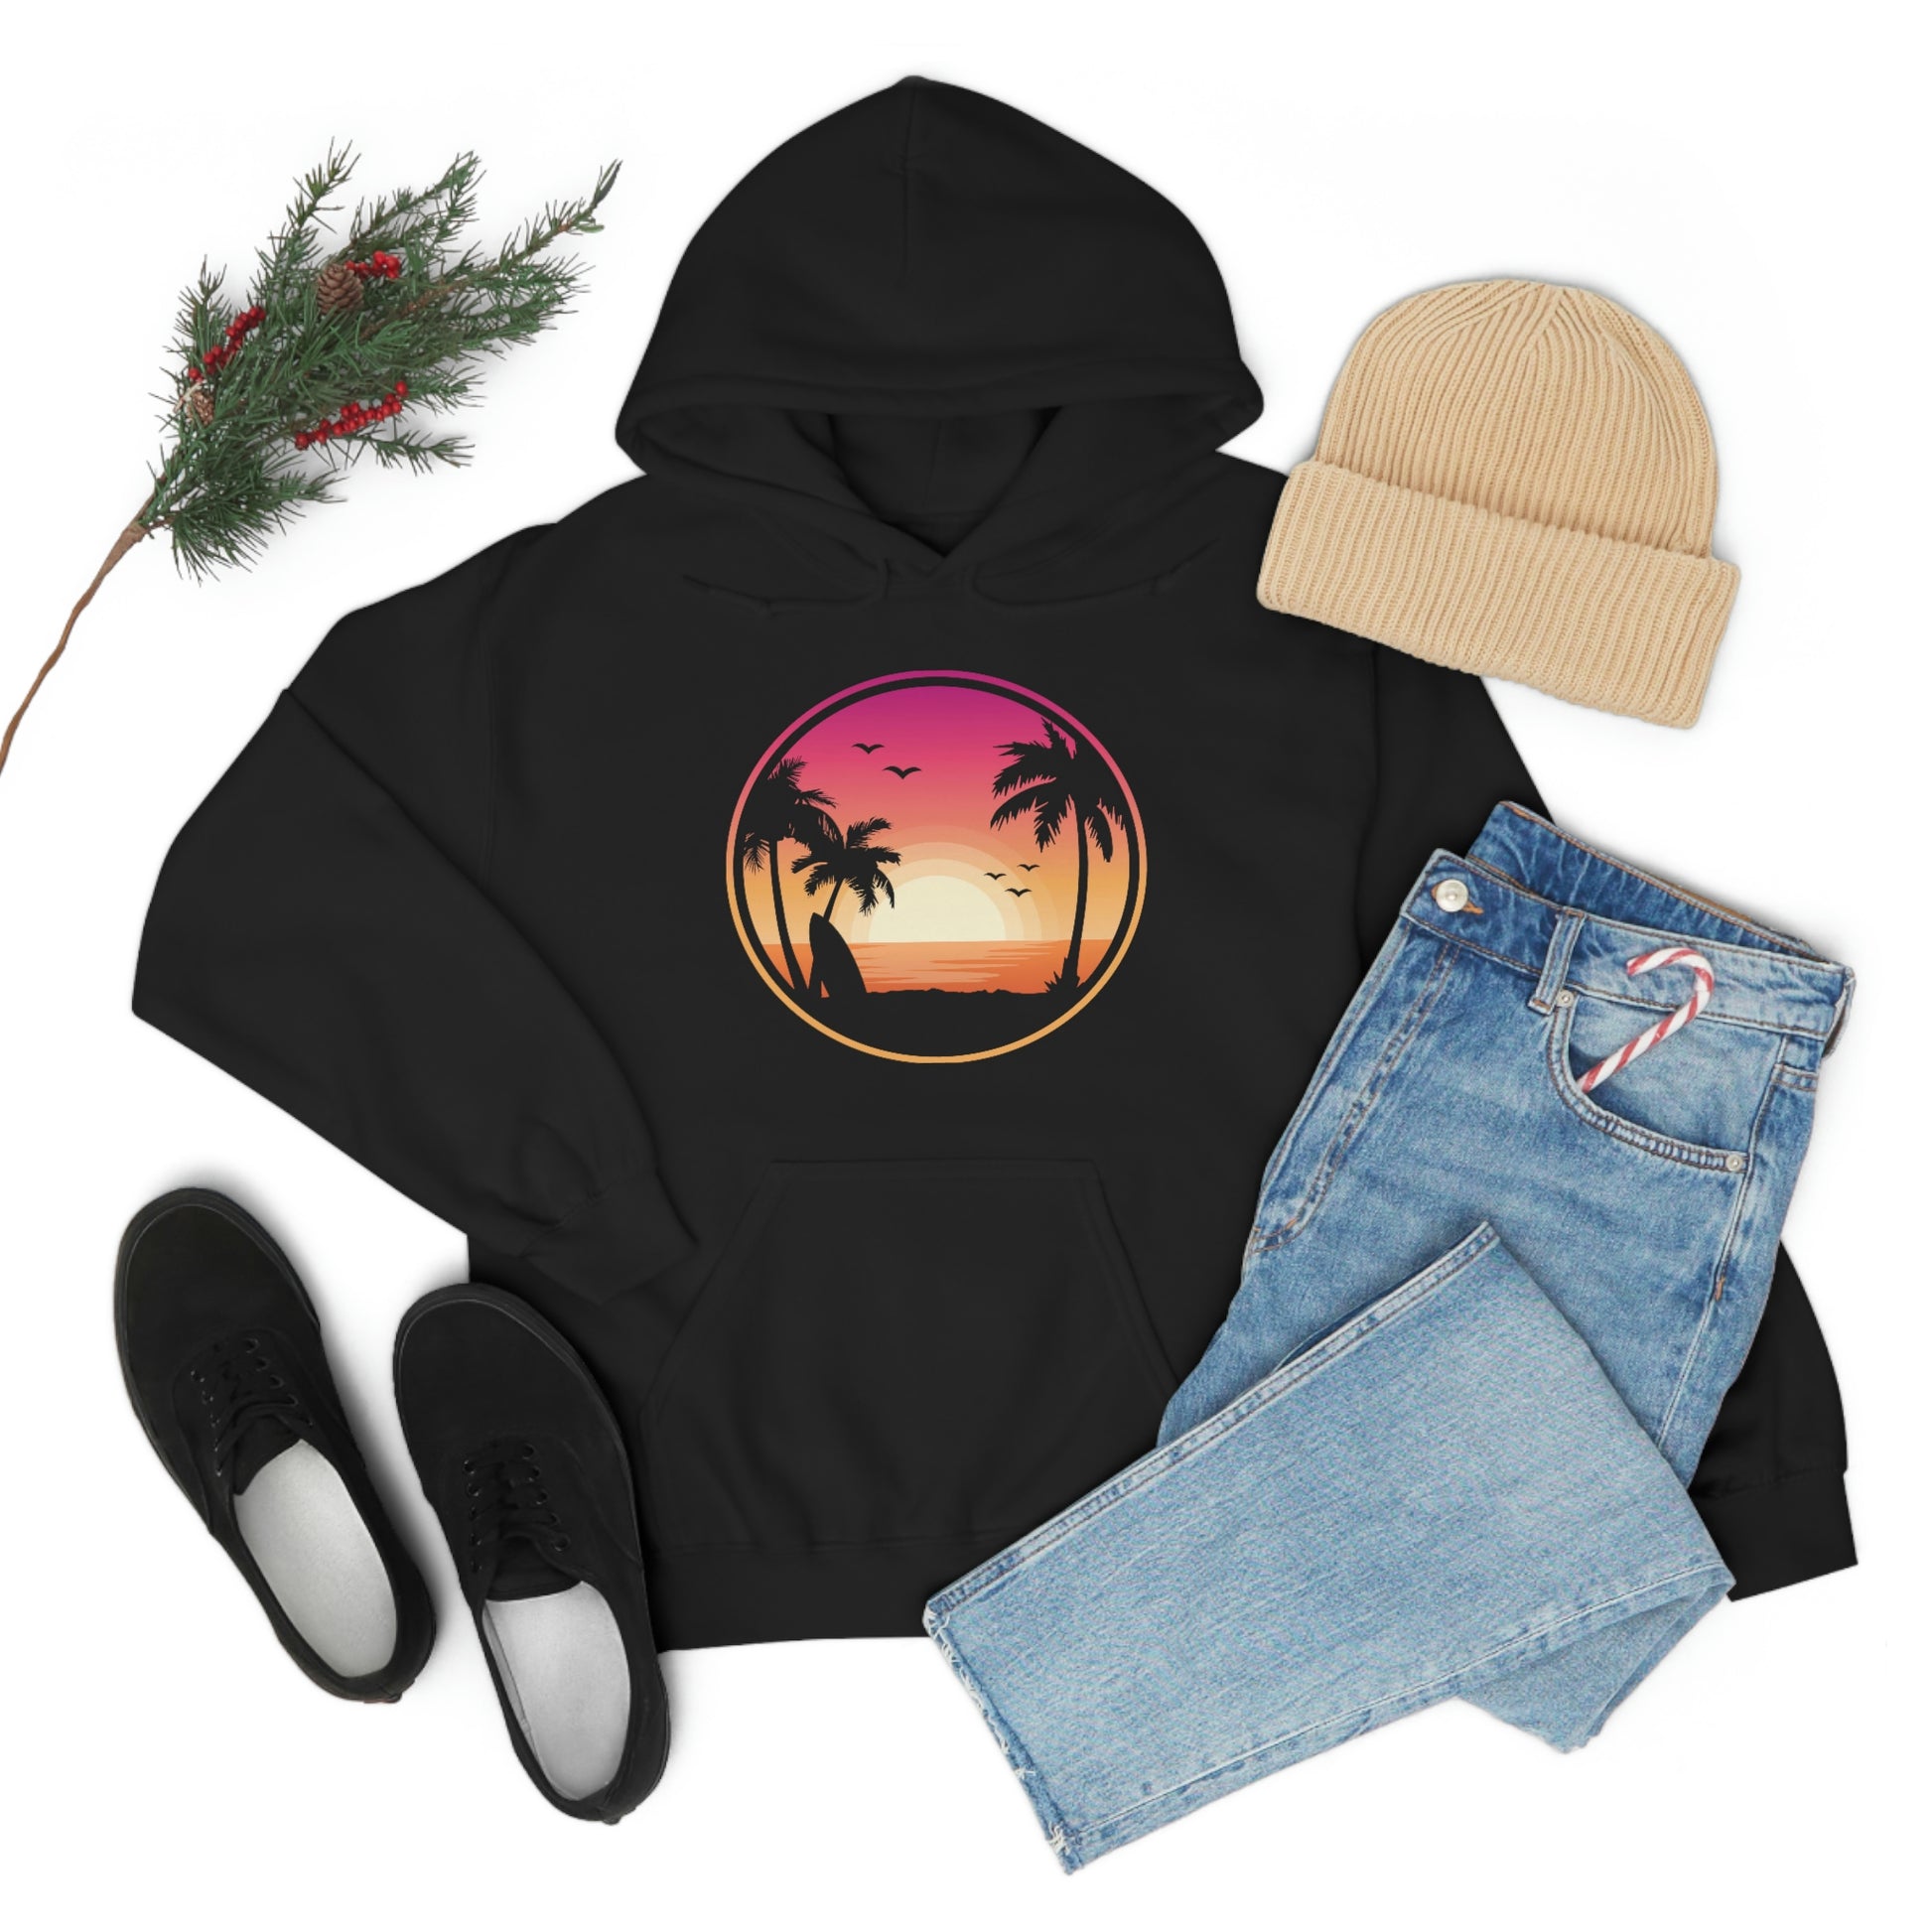 Beach Hoodie, Ocean Palm Trees Sun Pullover Men Women Adult Aesthetic Graphic Cotton Hooded Sweatshirt with Pockets Starcove Fashion